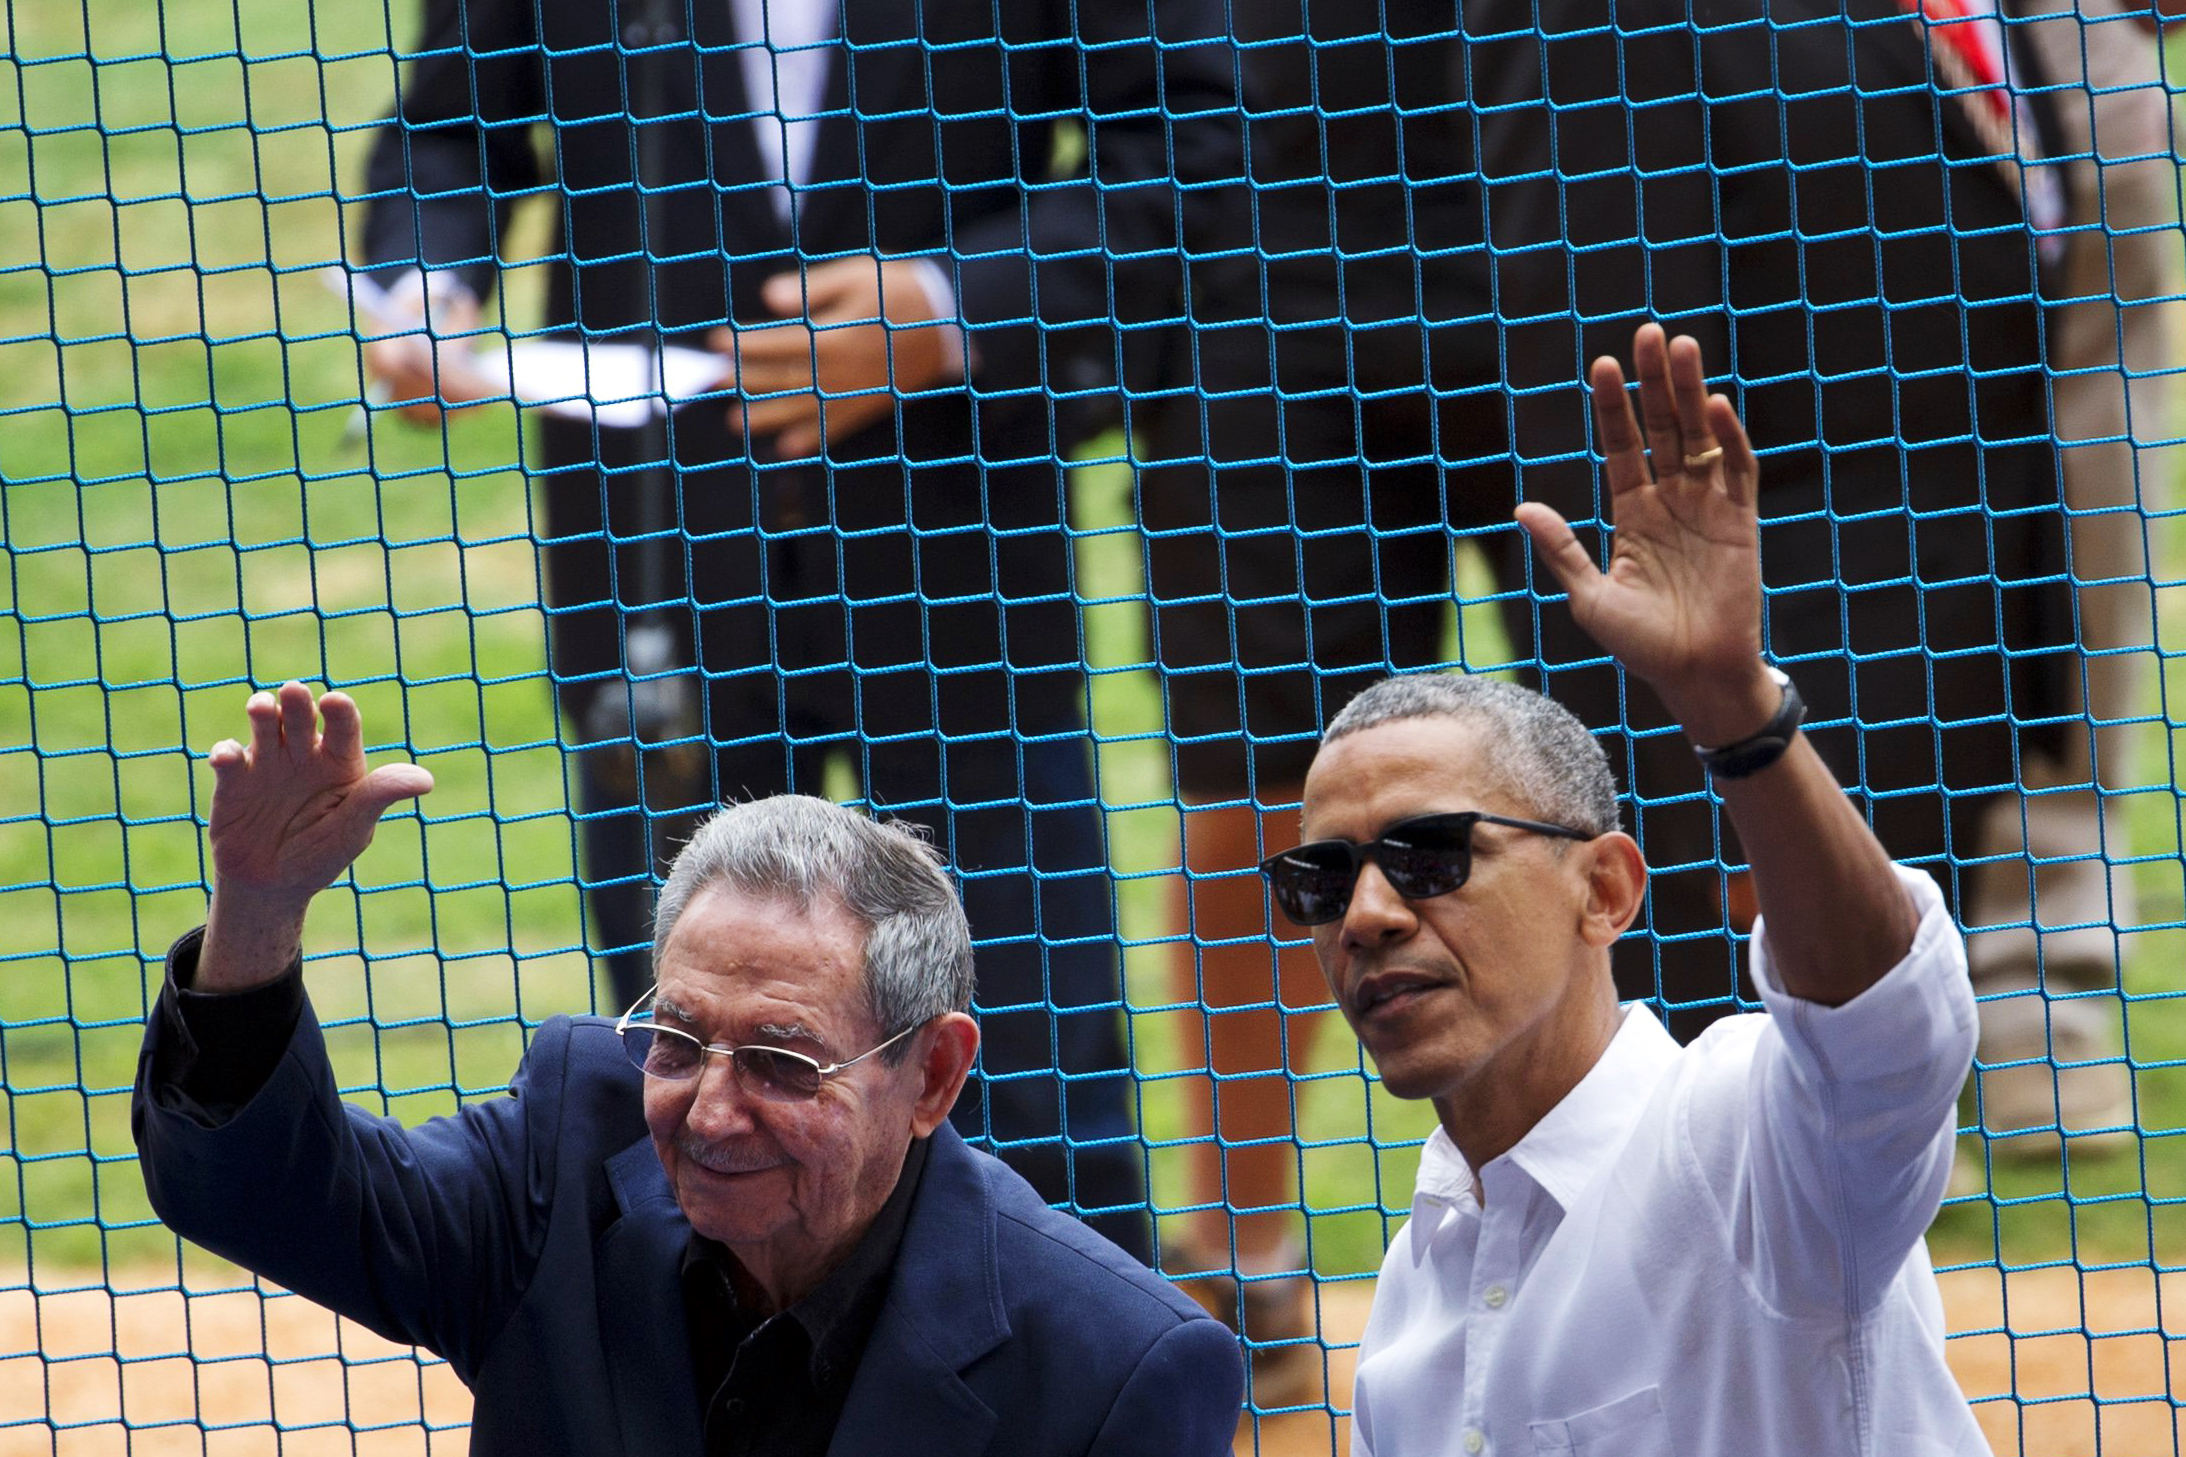 U.S. President Barack Obama, right, and Cuban President Raul Castro wave to fans as they arrive for a baseball game between the Tampa Bay Rays and the Cuban national baseball team in Havana on Tuesday, March 22, 2016.